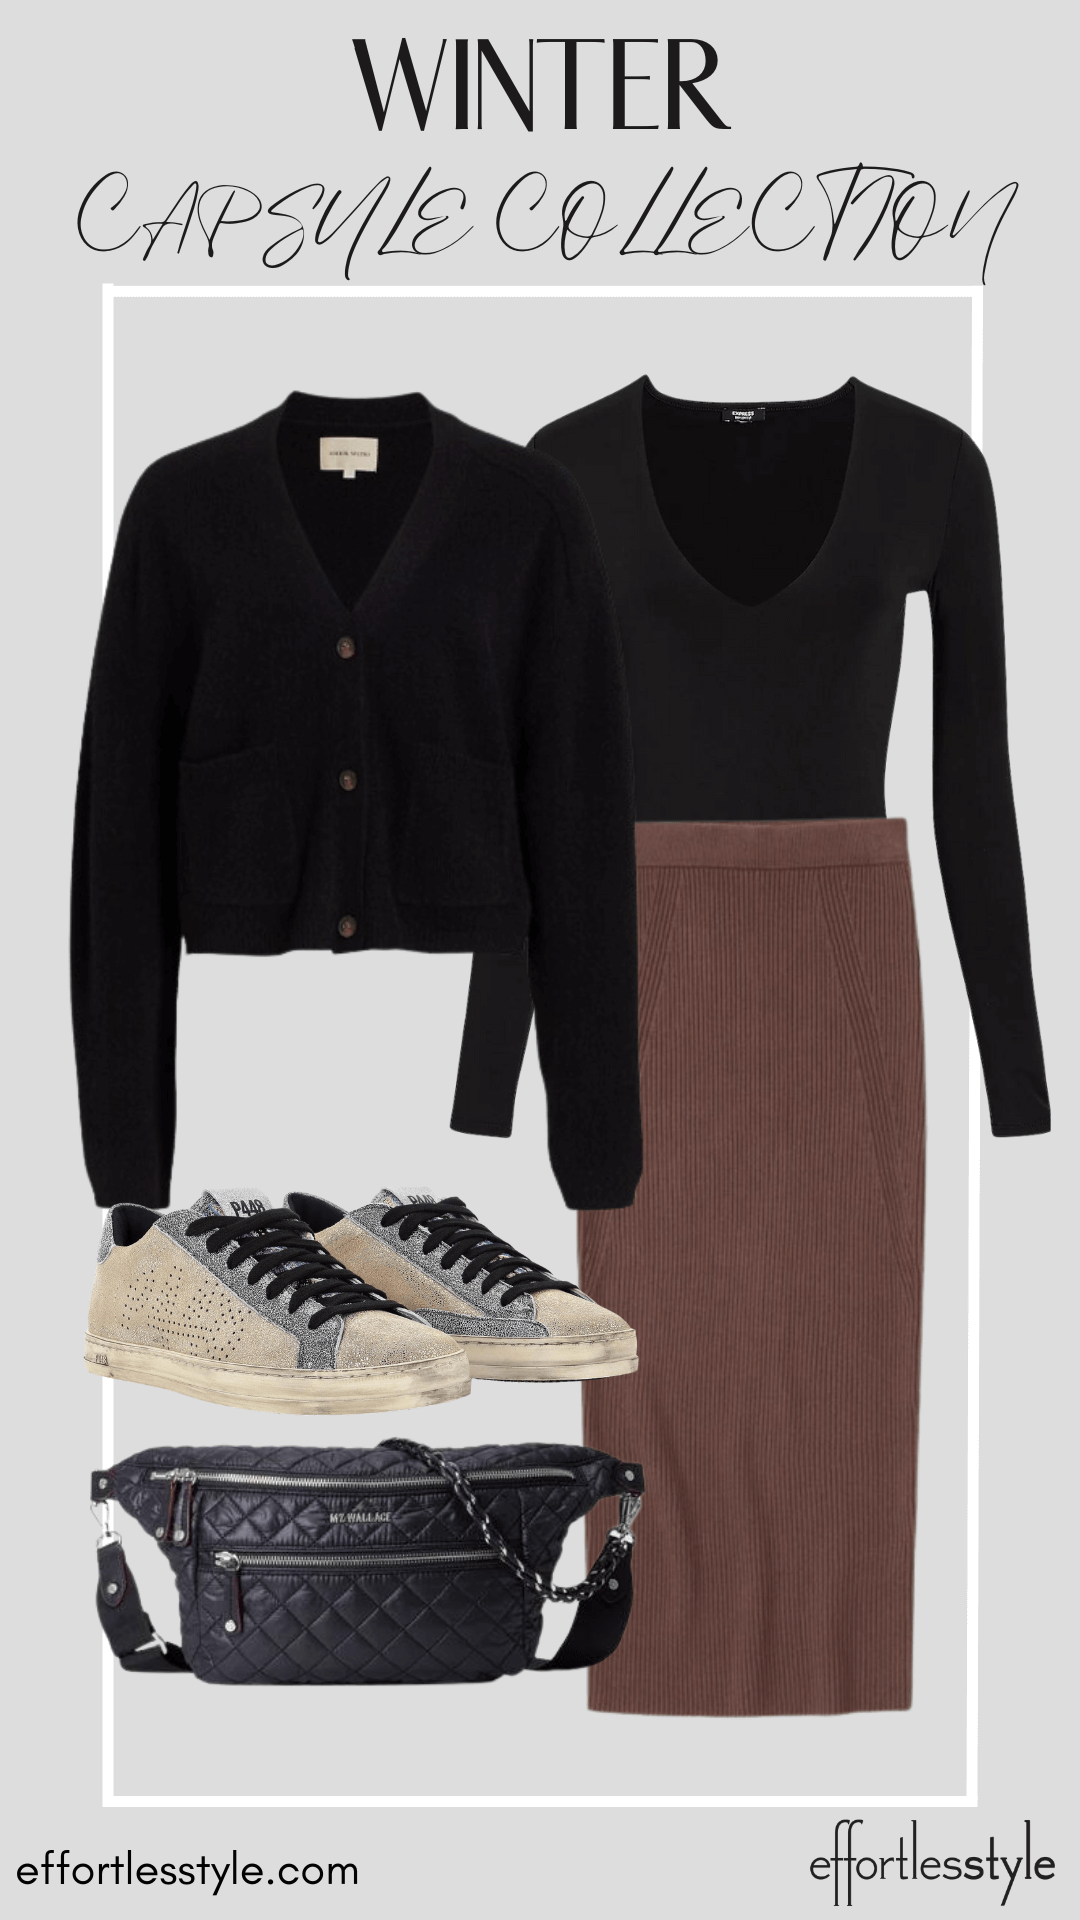 Cropped Cardigan & Black Bodysuit & Midi Skirt style inspiration for midi skirt ways to style a midi skirt wearing sneakers with a midi skirt fun styled looks for cold weather